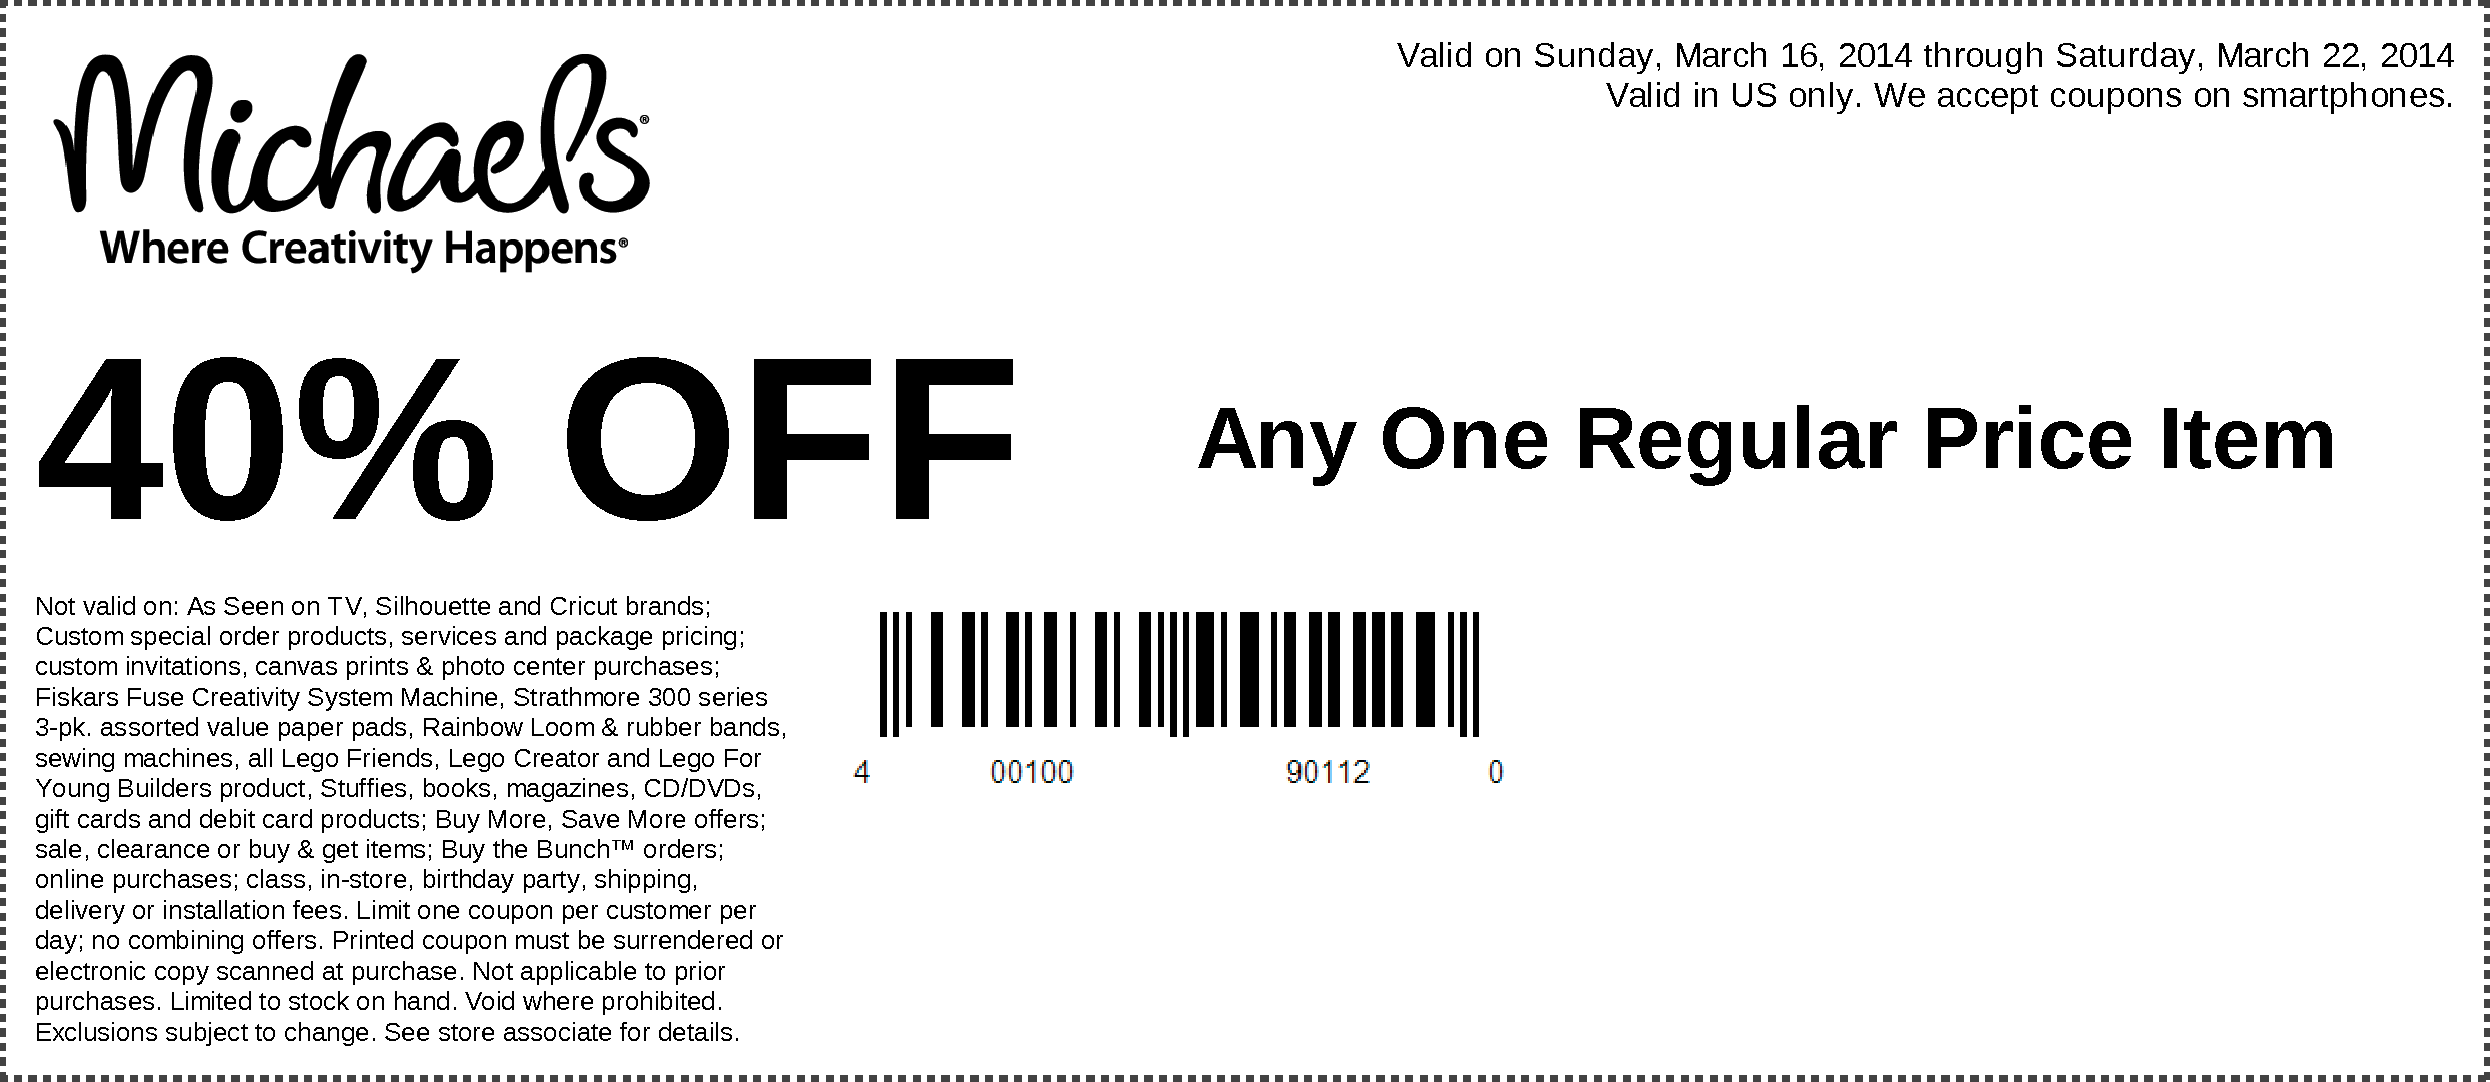 Michaels Promo Coupon Codes and Printable Coupons